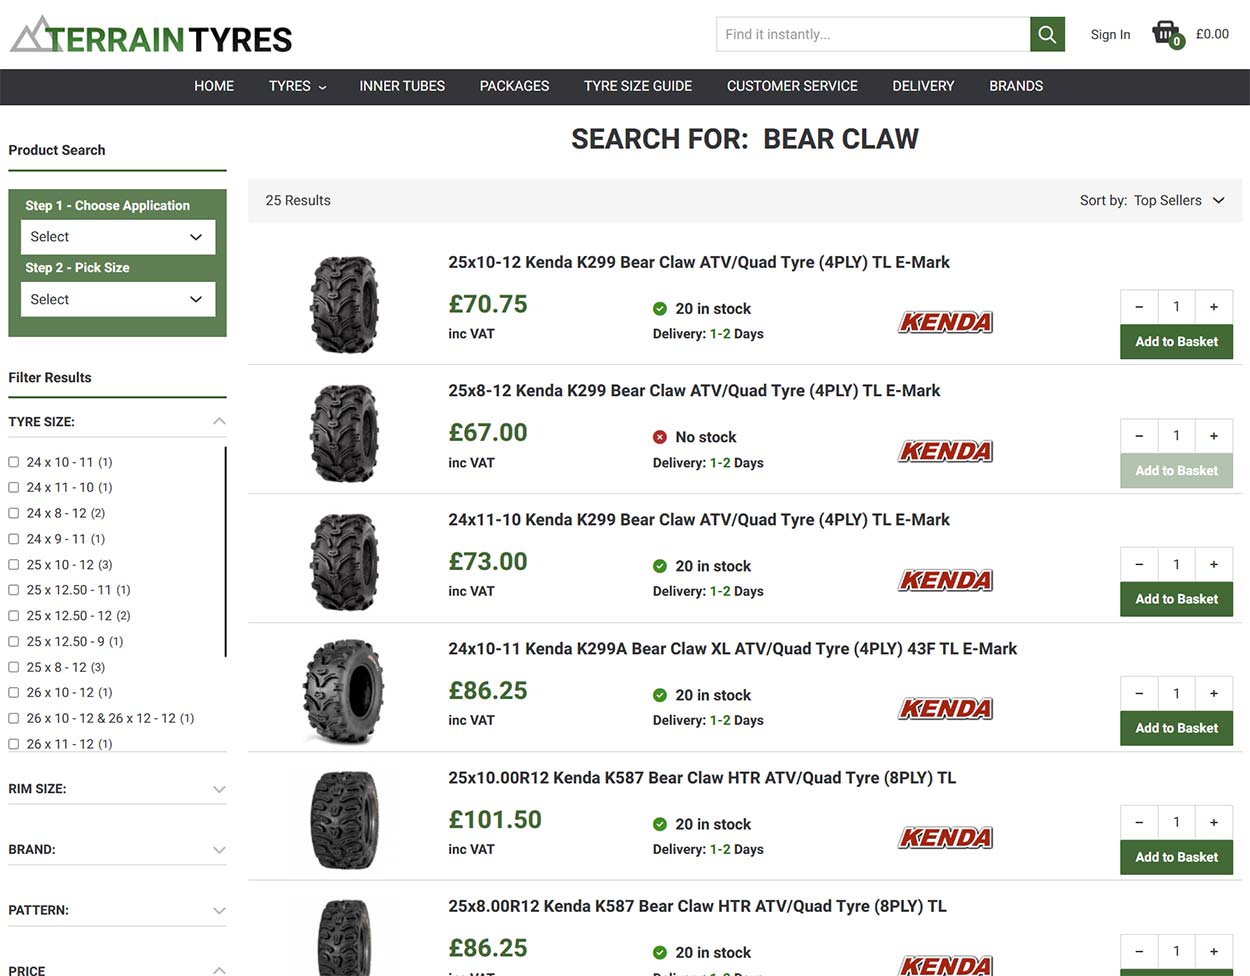 Find it Instantly Results-Terrain Tyres